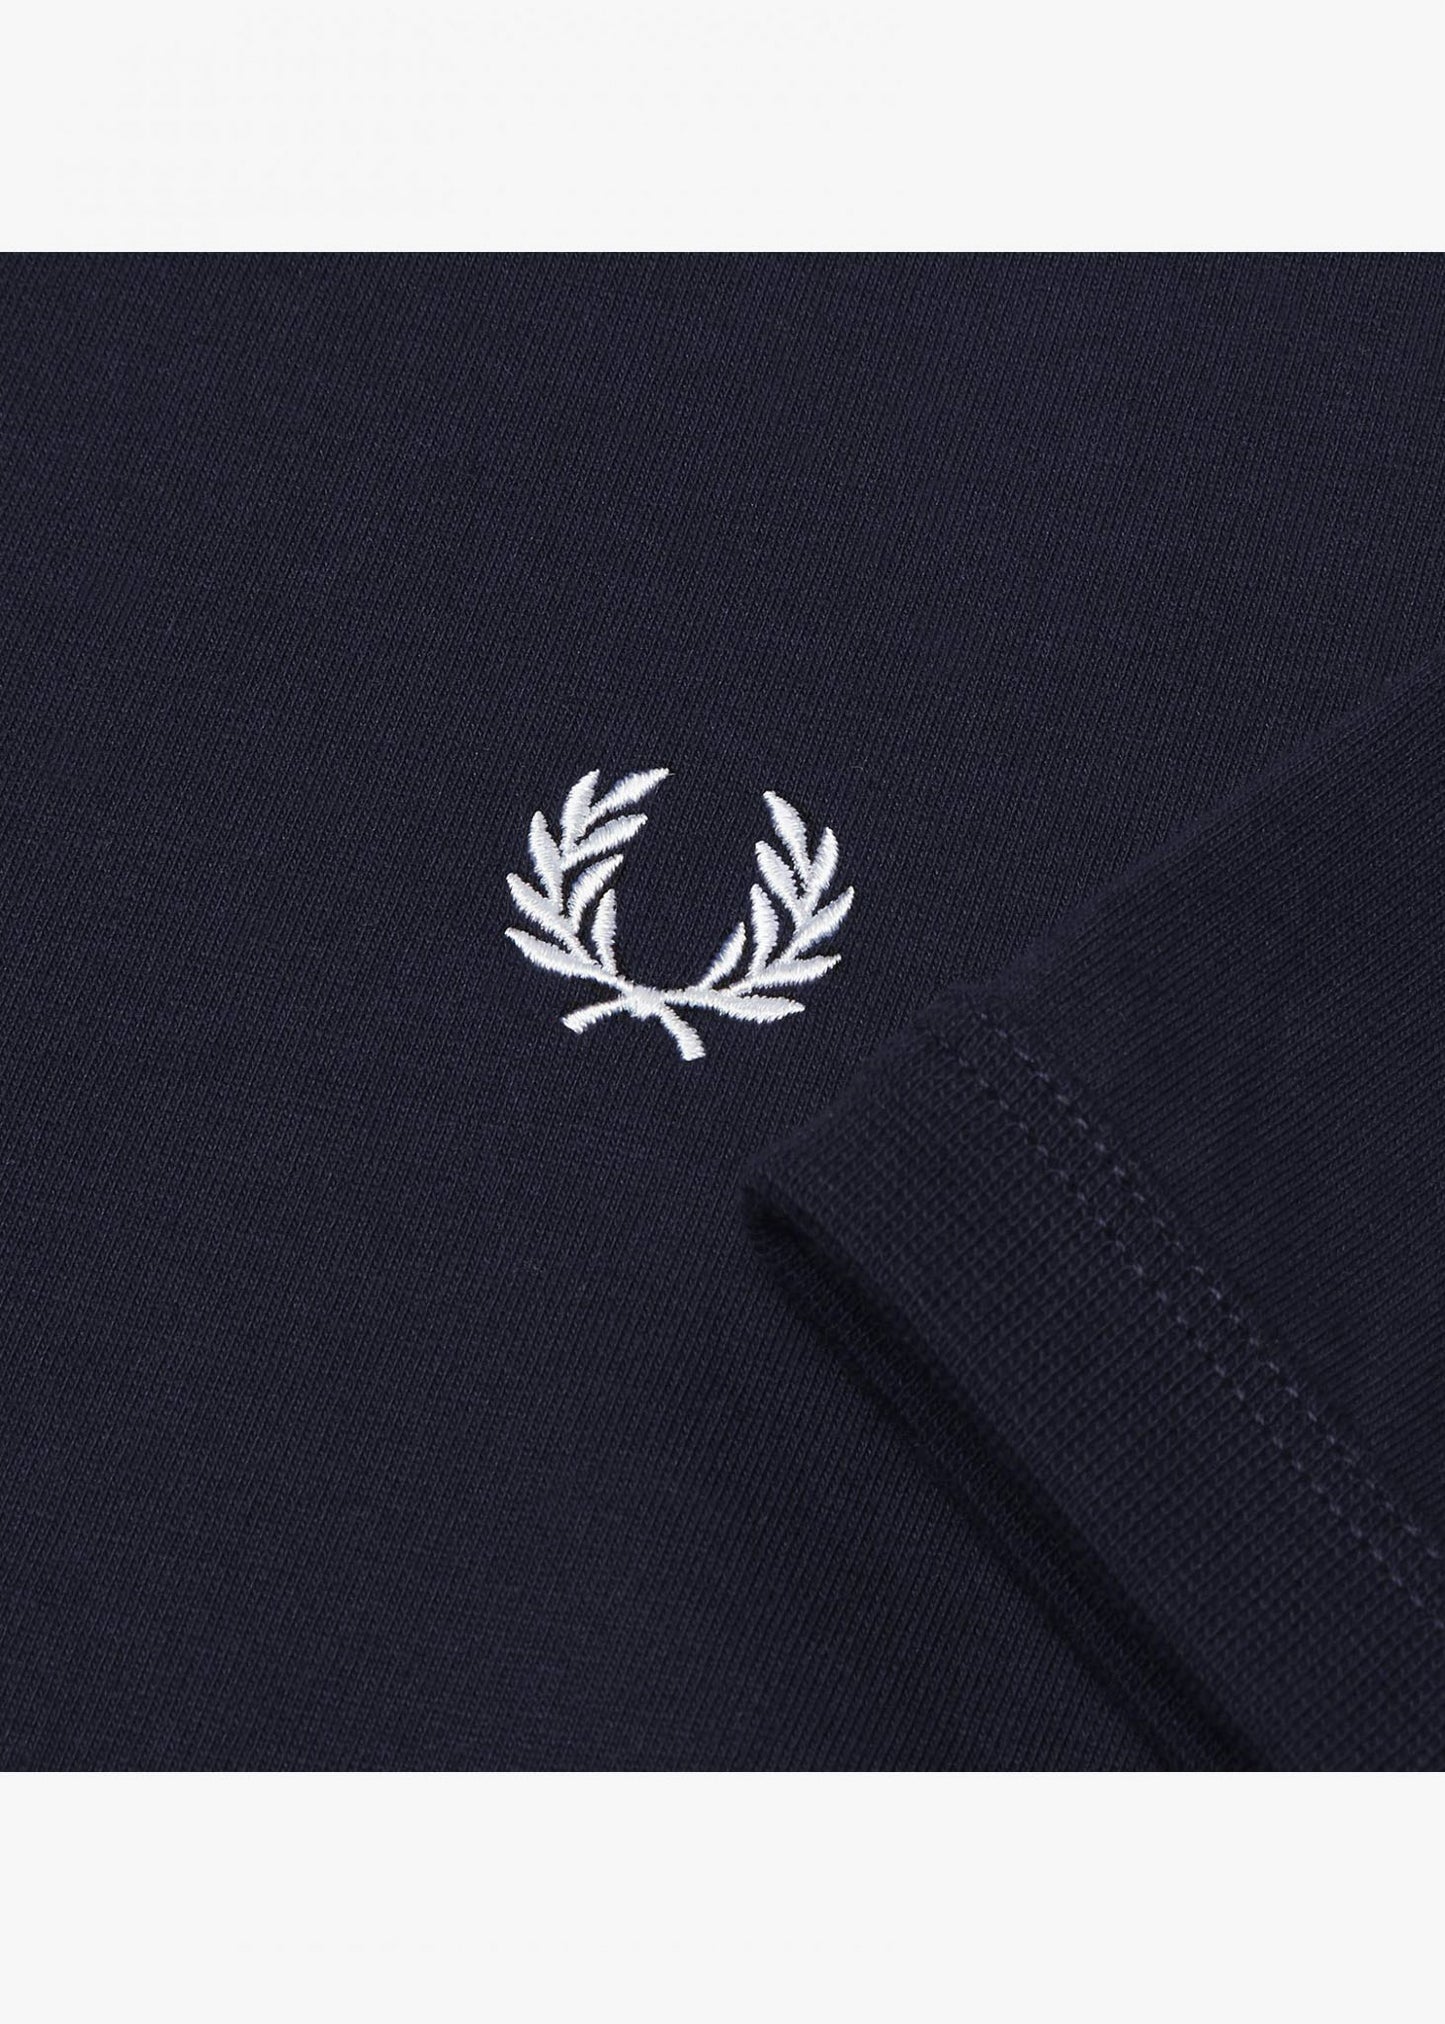 Fred Perry T-shirts  Ringer t-shirt - navy 